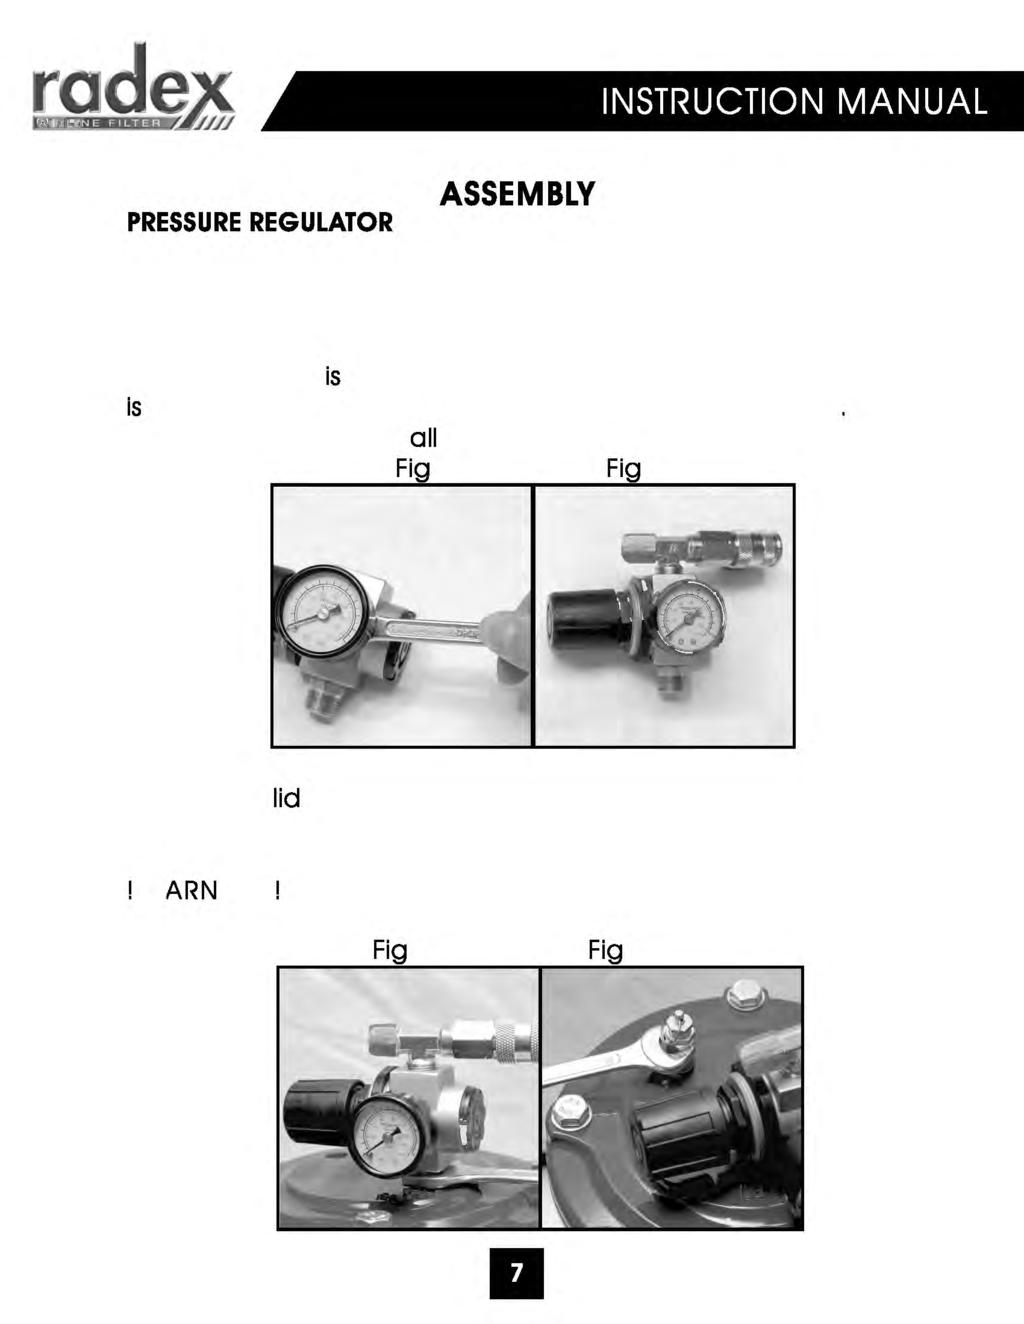 rod~~ ASSEMBLY PRESSURE REGULATOR To assemble the pressure regulator, thread the pressure gauge into the body (refer Fig 2.